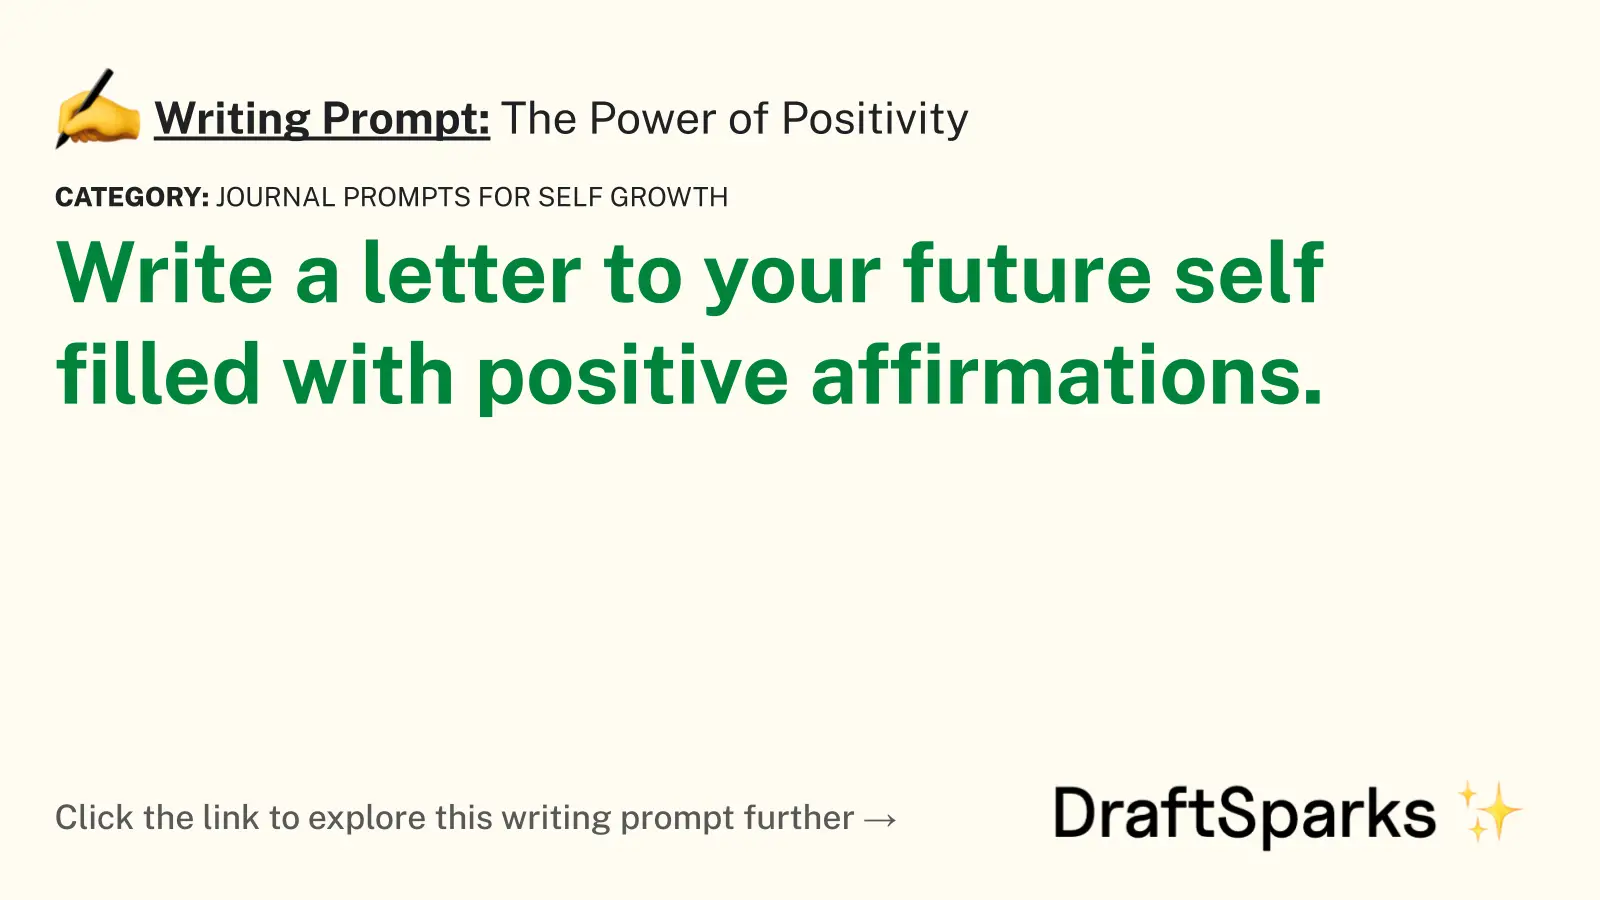 Writing Prompt: The Power of Positivity • DraftSparks